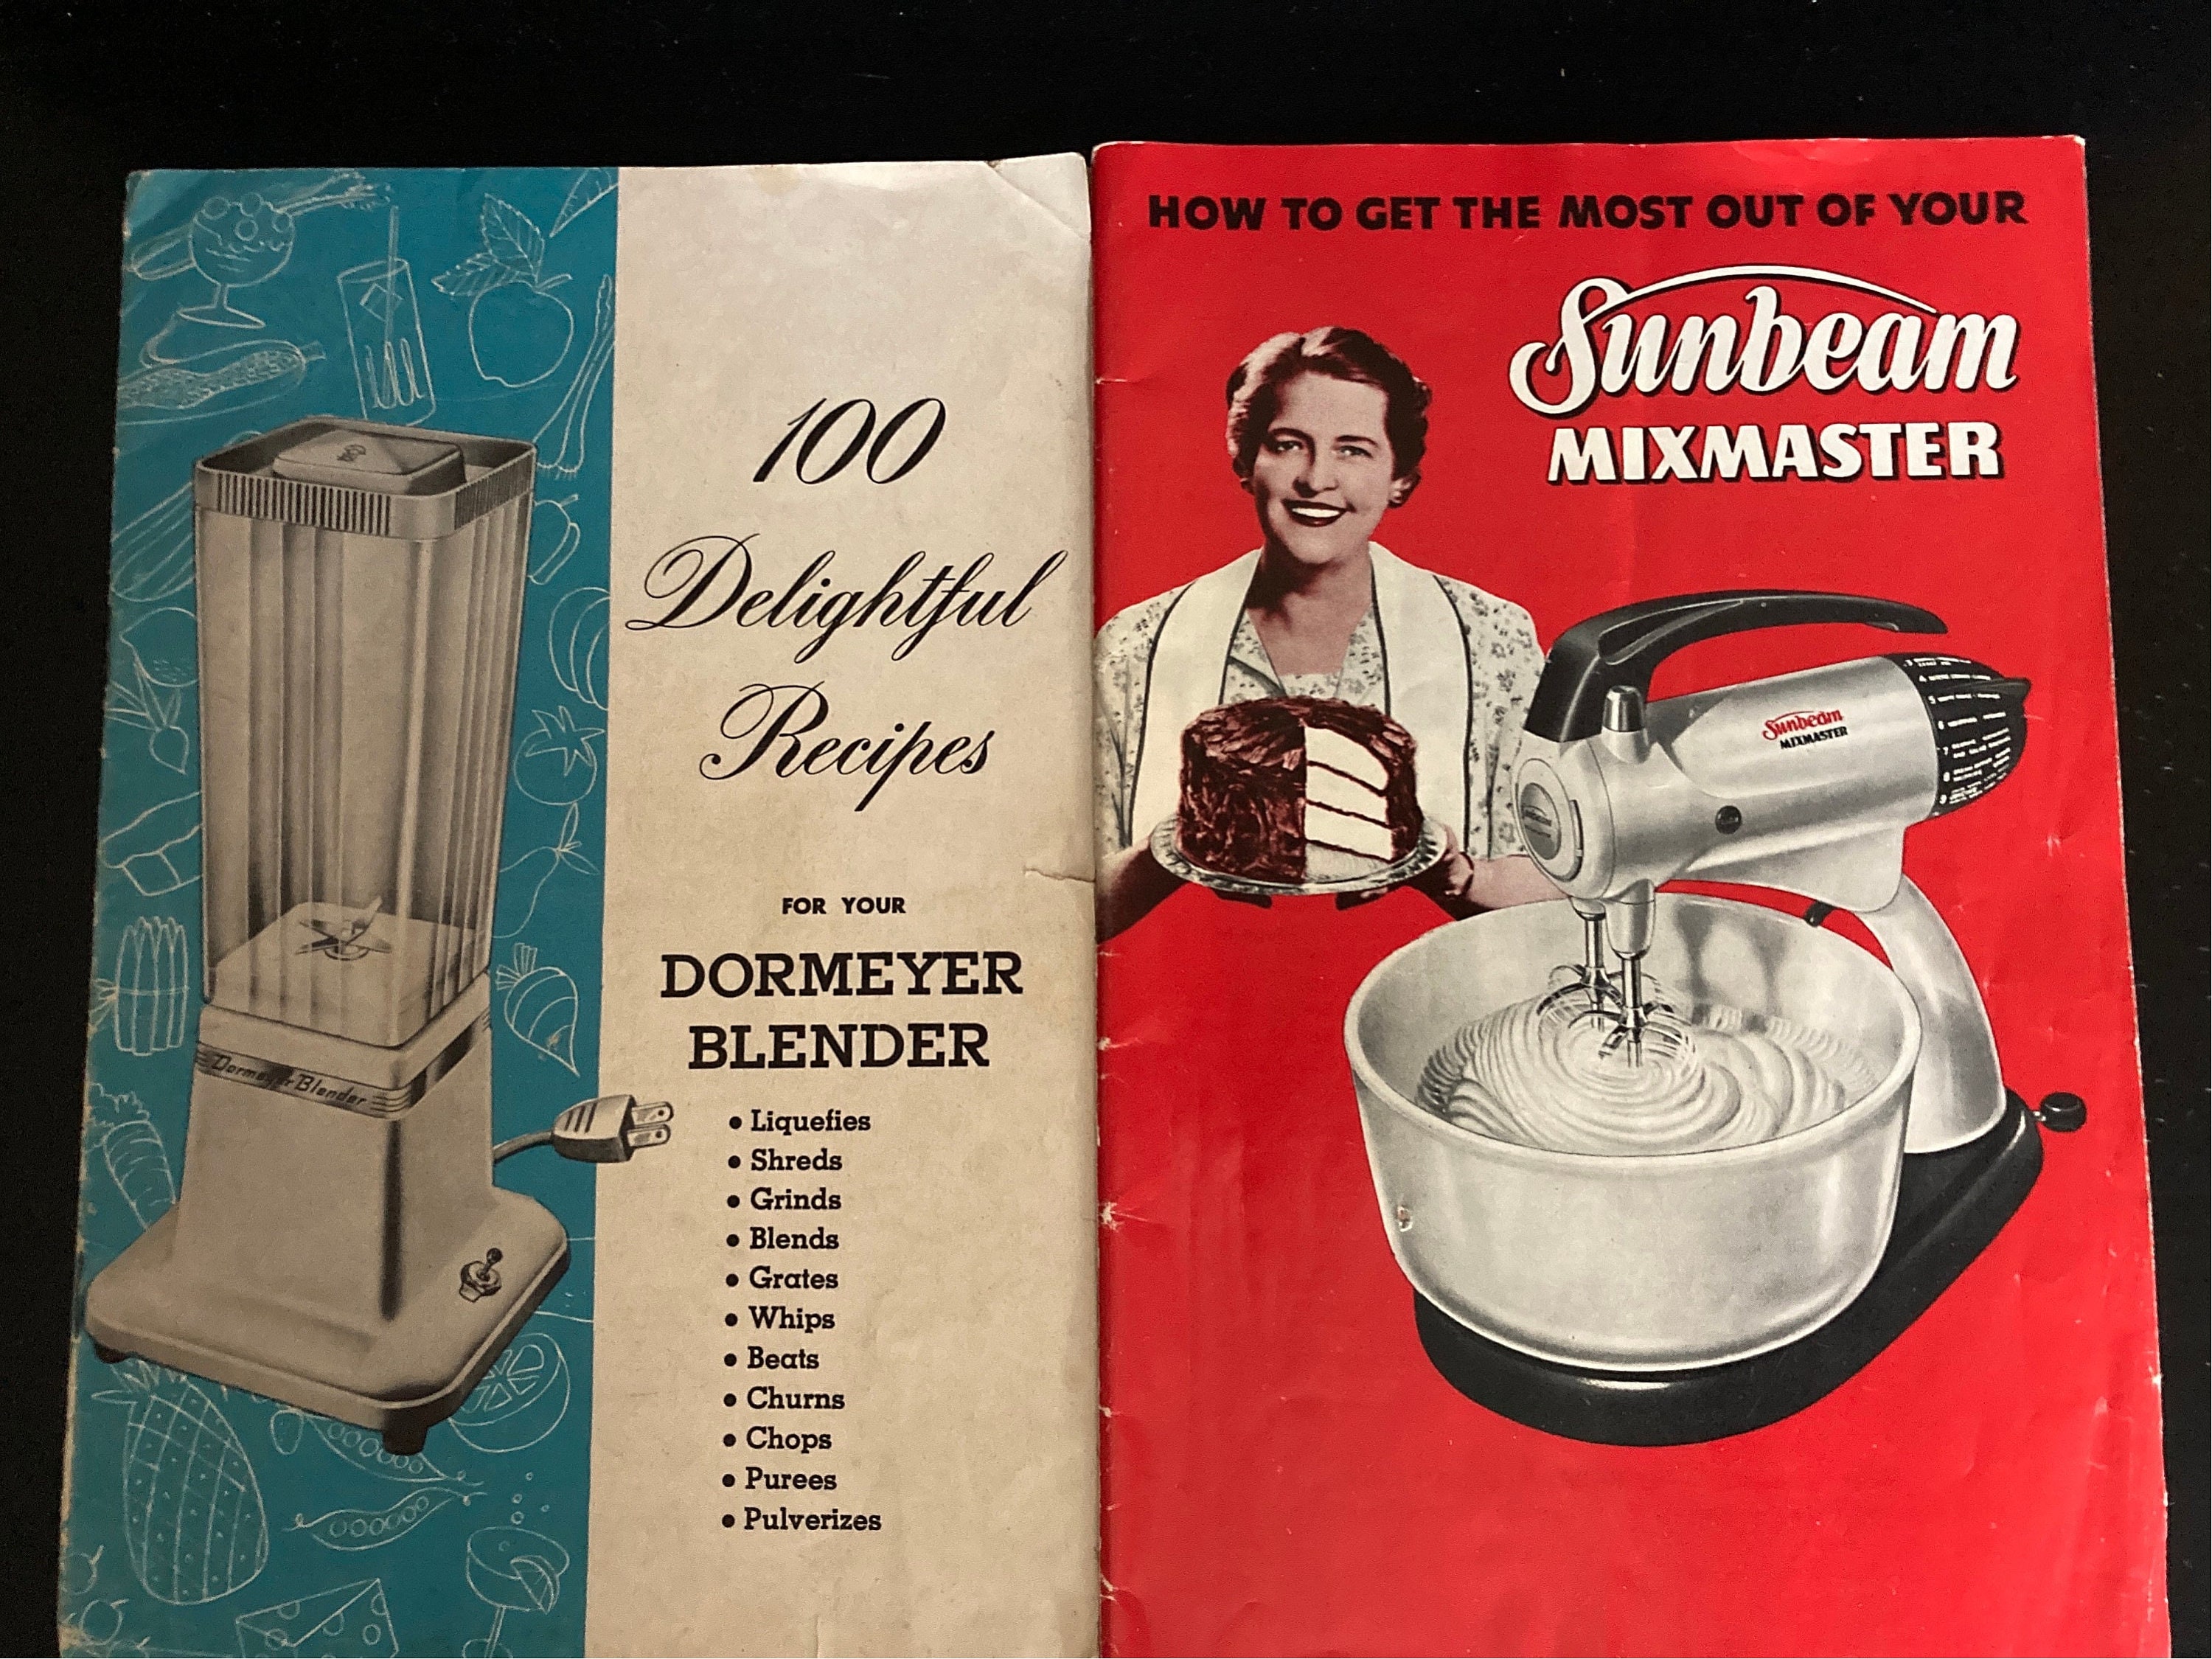 Old House Handyman: Fixing old Mixmaster proves value of 1950s tech